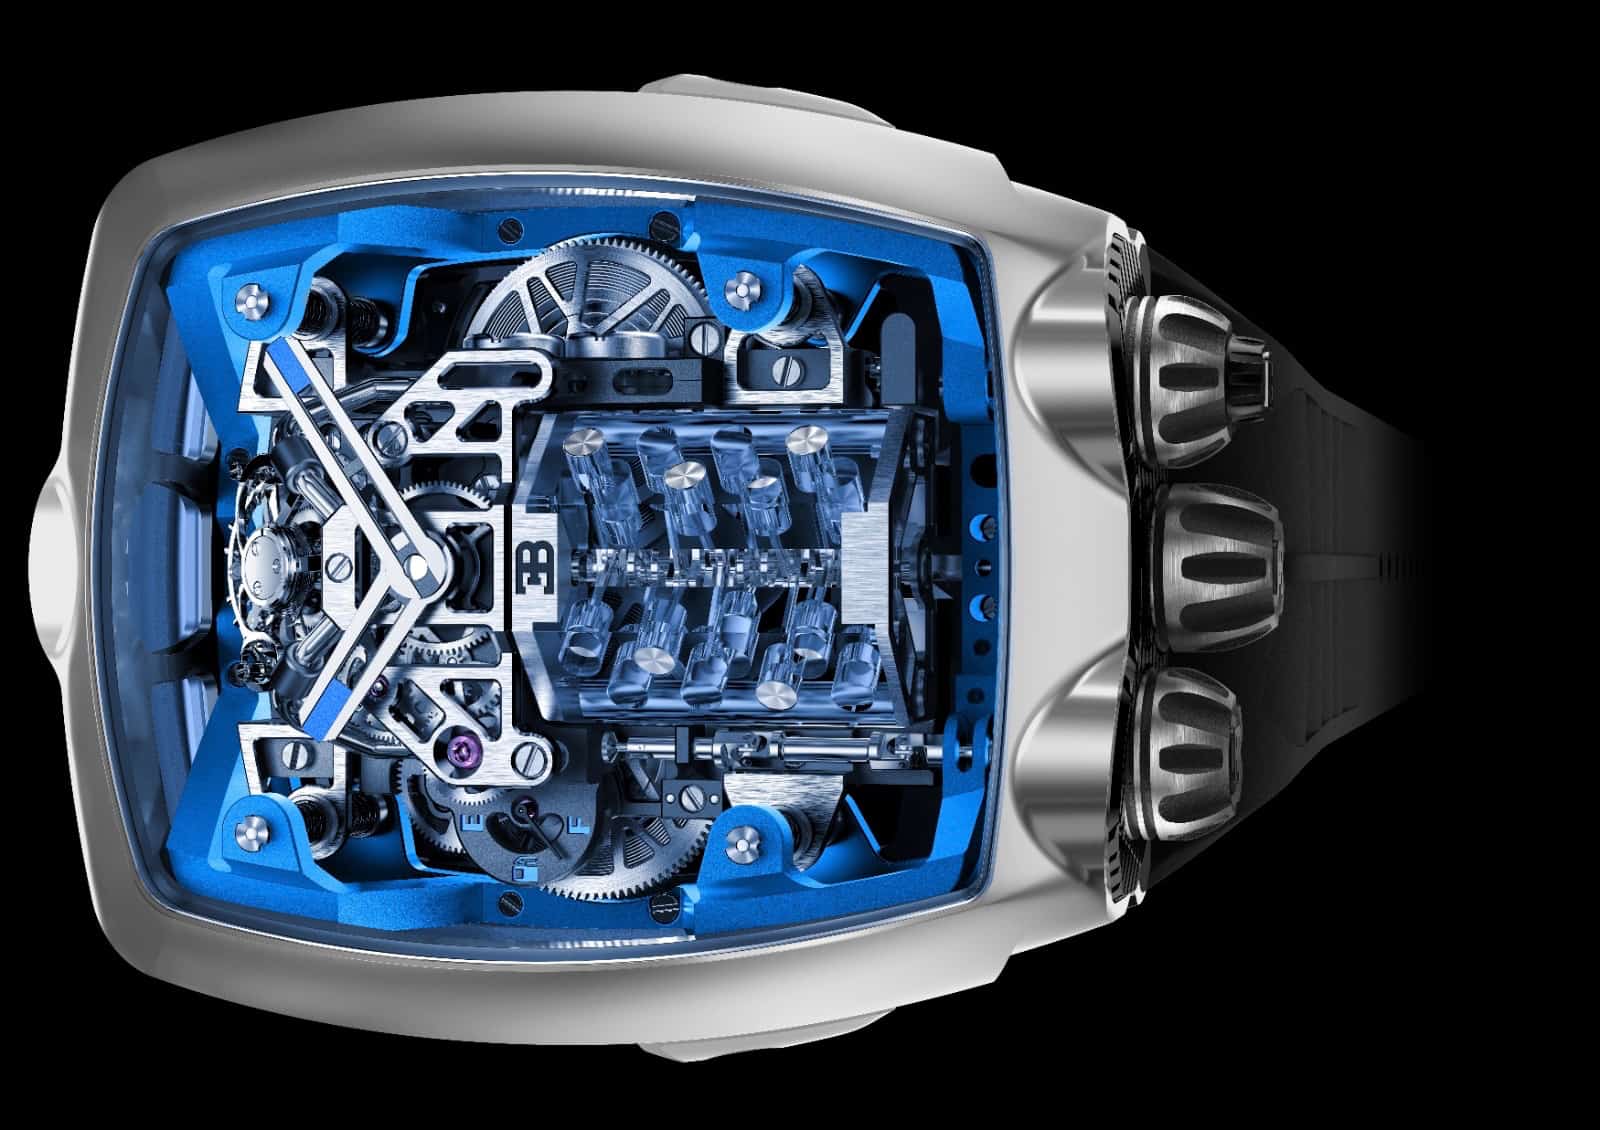 Bugatti watch, Watch features Bugatti ‘engine’ with moving parts, ClassicCars.com Journal